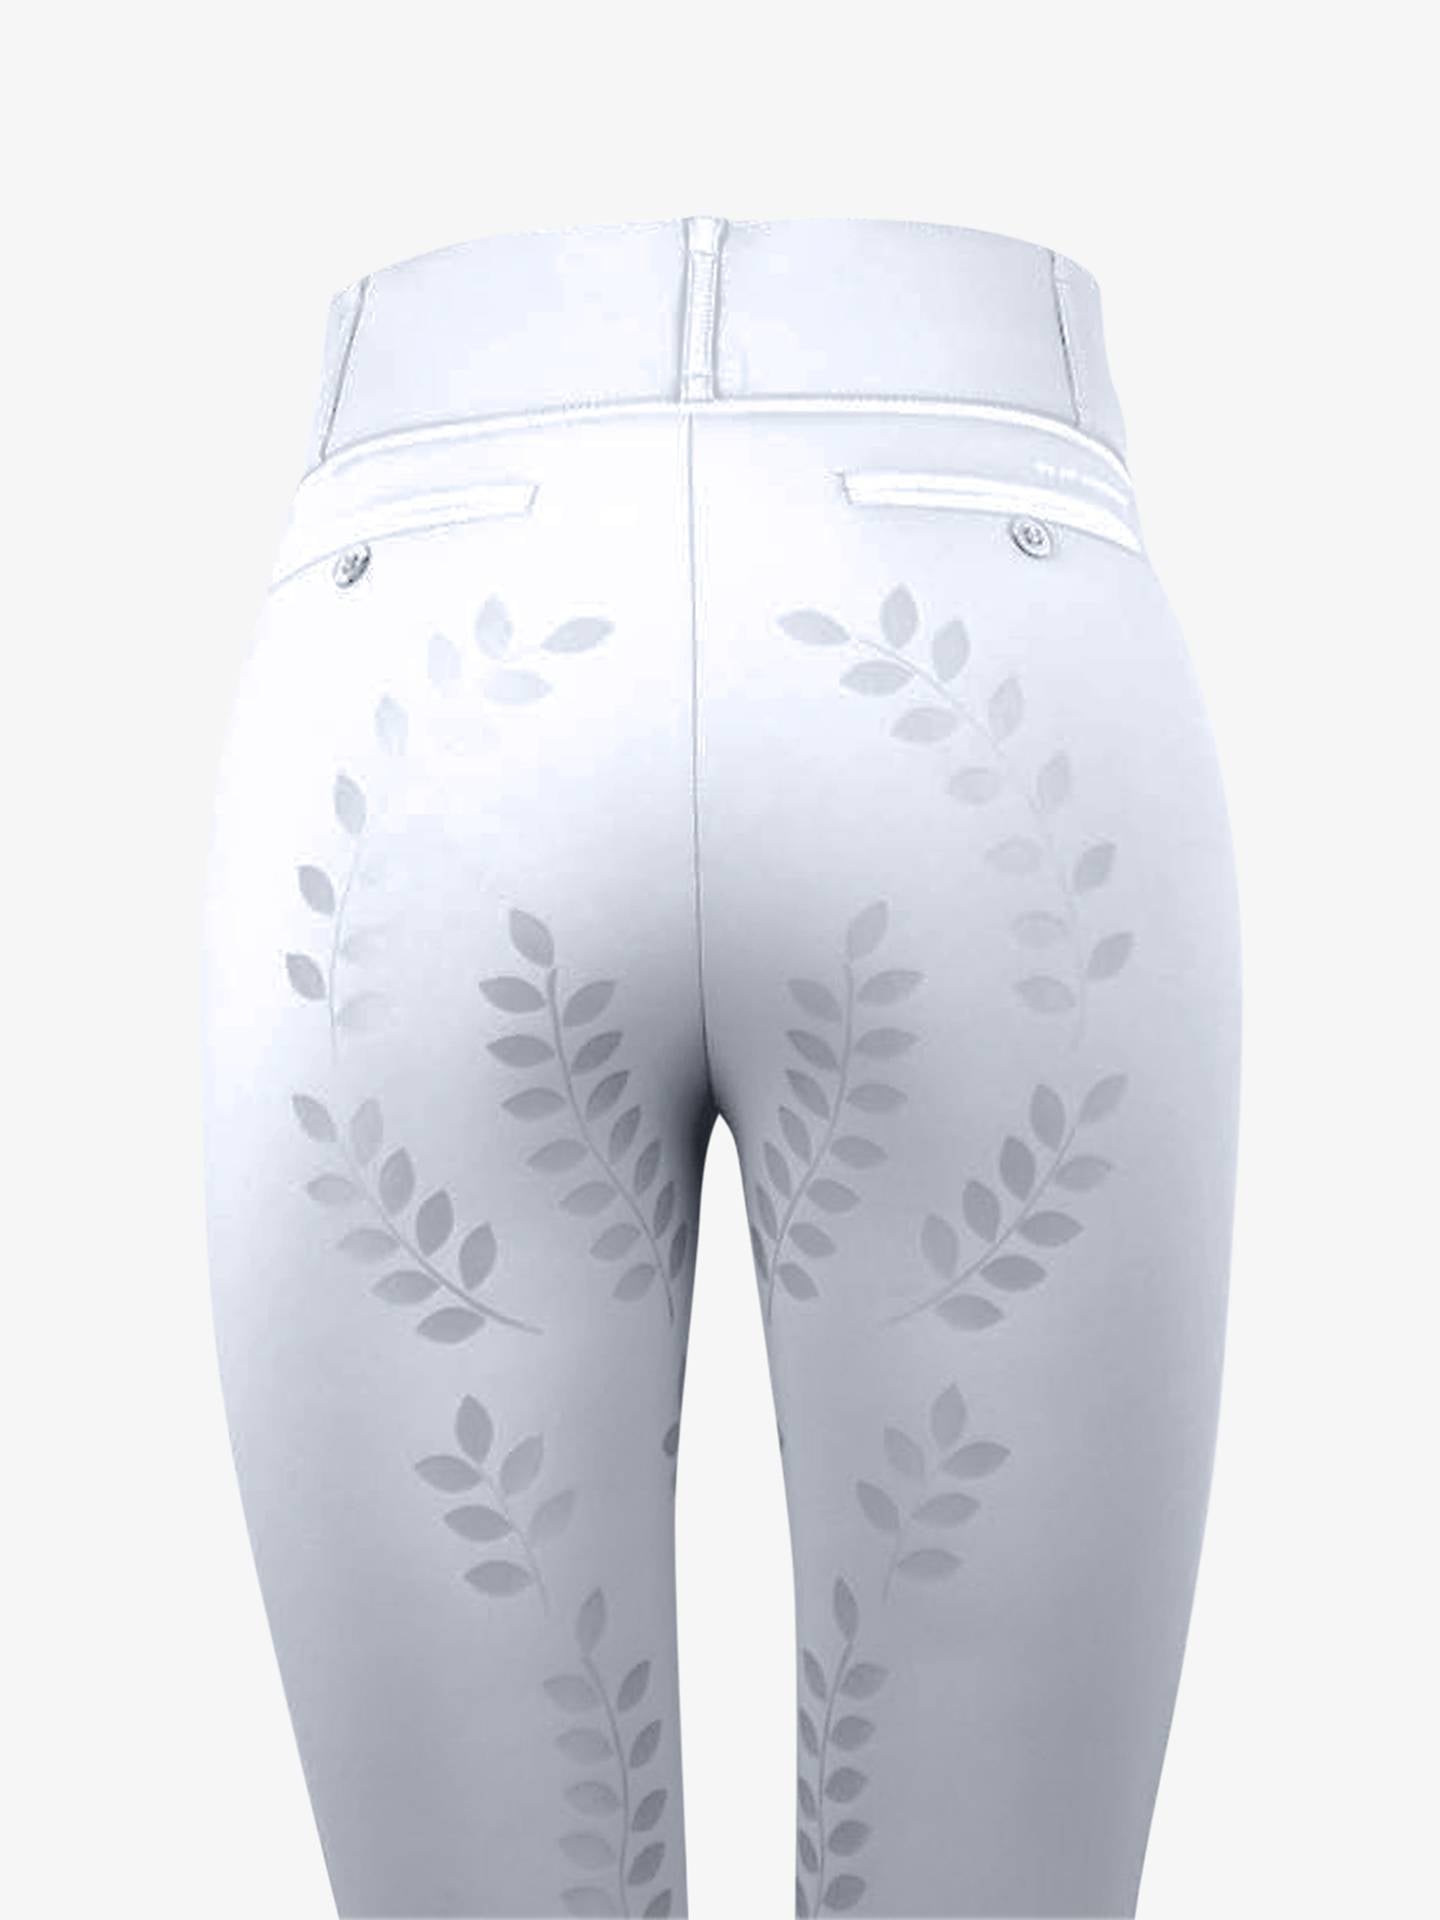 High-waisted, full seat riding breeches. The riding breeches are made of a 4-way-stretch material that breathes and provides optimal movability. The full seat, shaping grip gives not only a good grip, but also a beautiful silhouette. The back pocket imitations are strategically placed to not scratch the saddle. The riding breeches are elastic at the ankles.